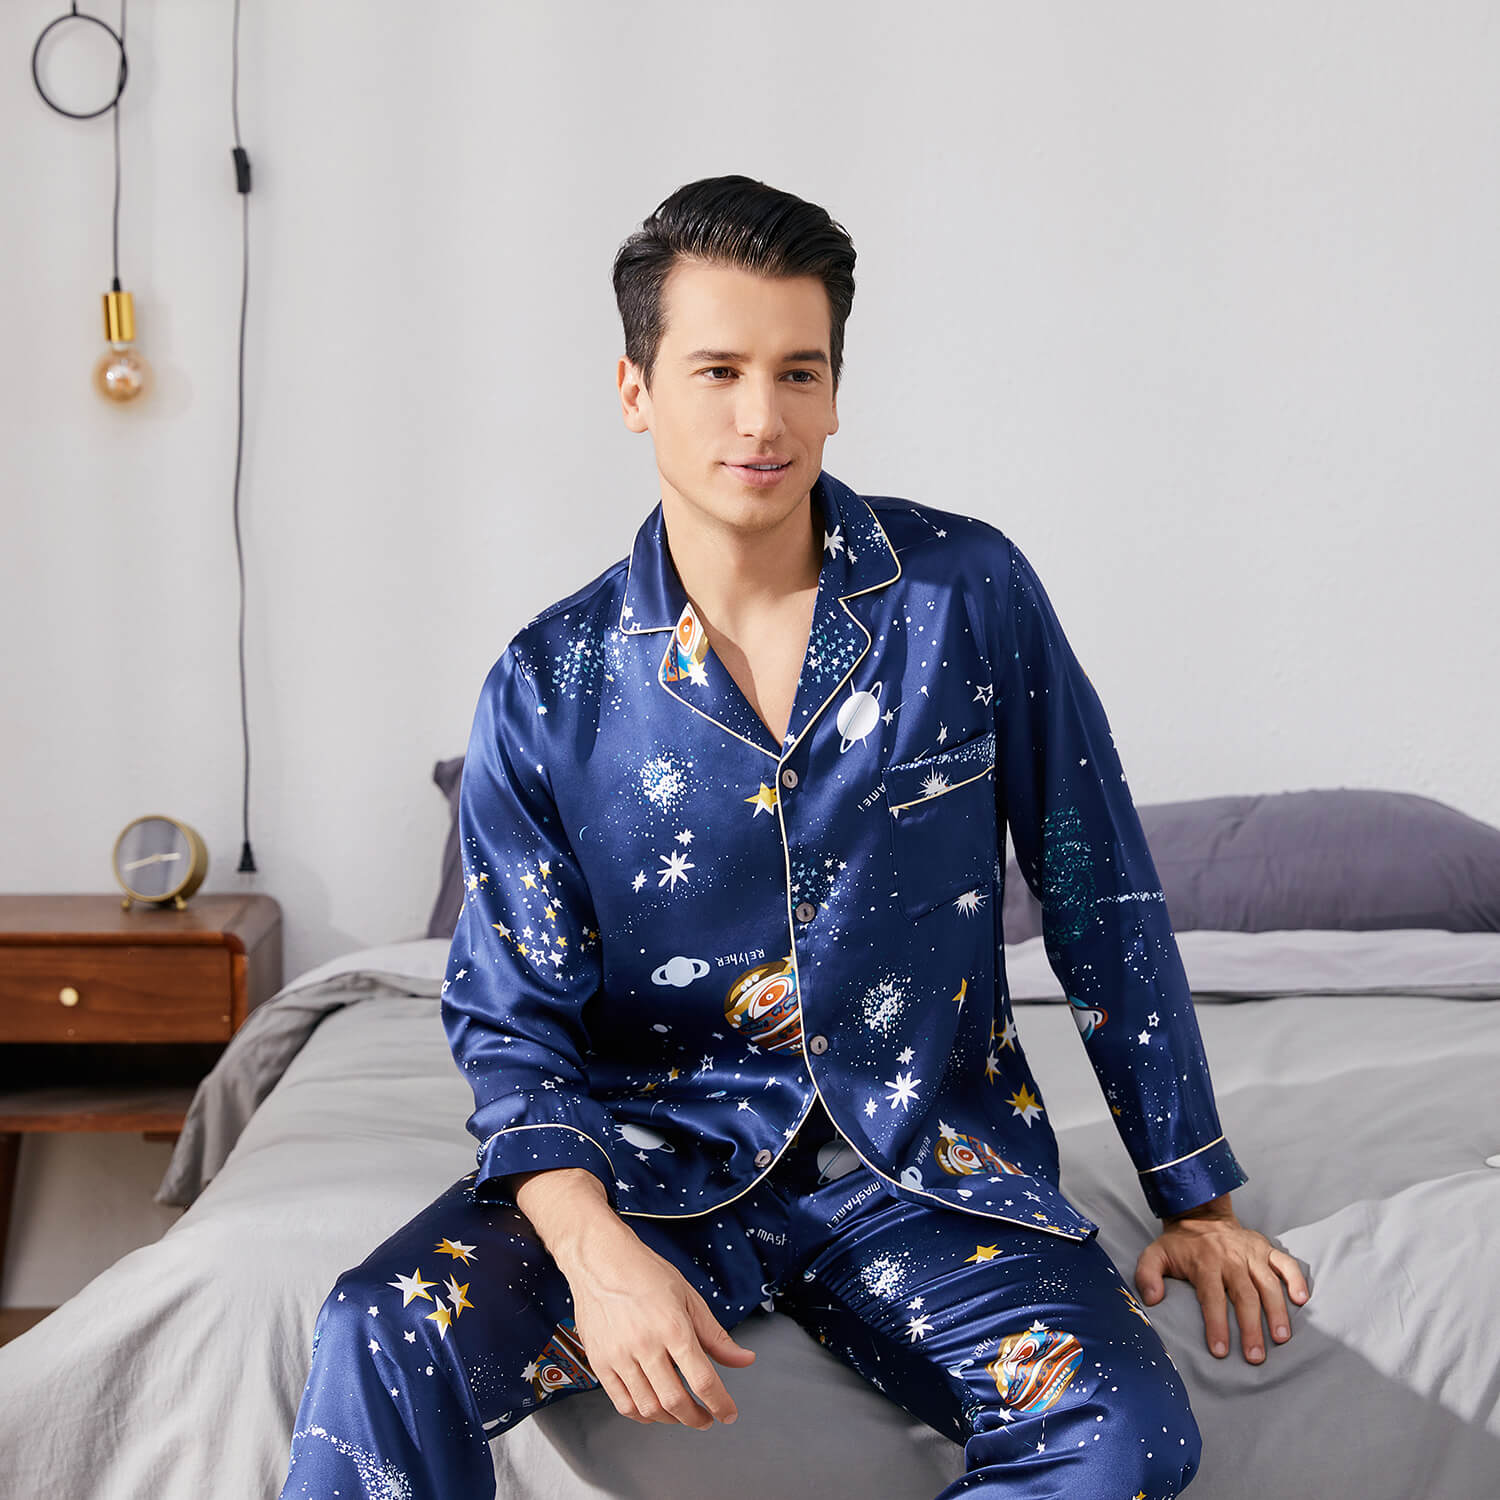 Satin Sleepwear And Sexy Pajamas That Are Comfy, Too 